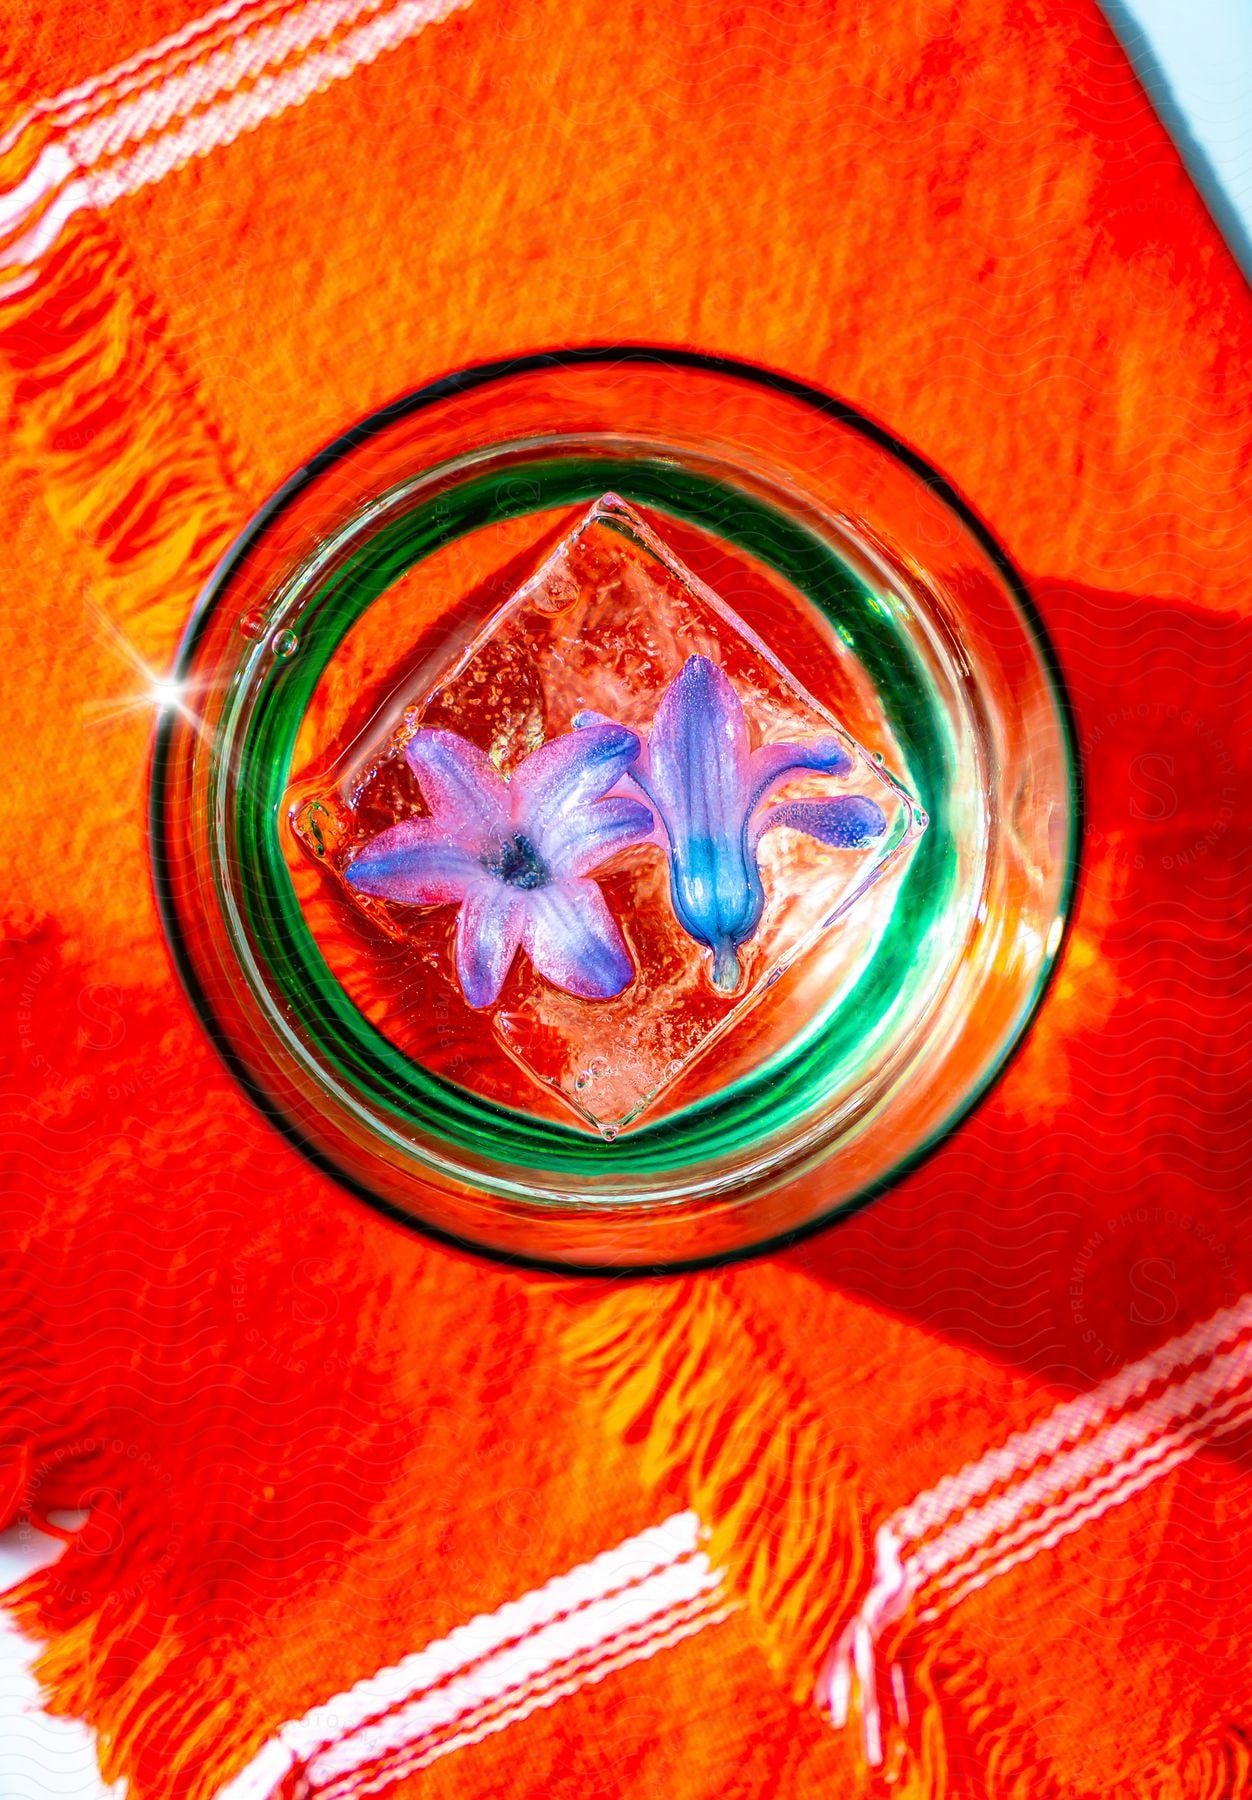 Flowers frozen in an ice cube in an iced drink on an orange cloth